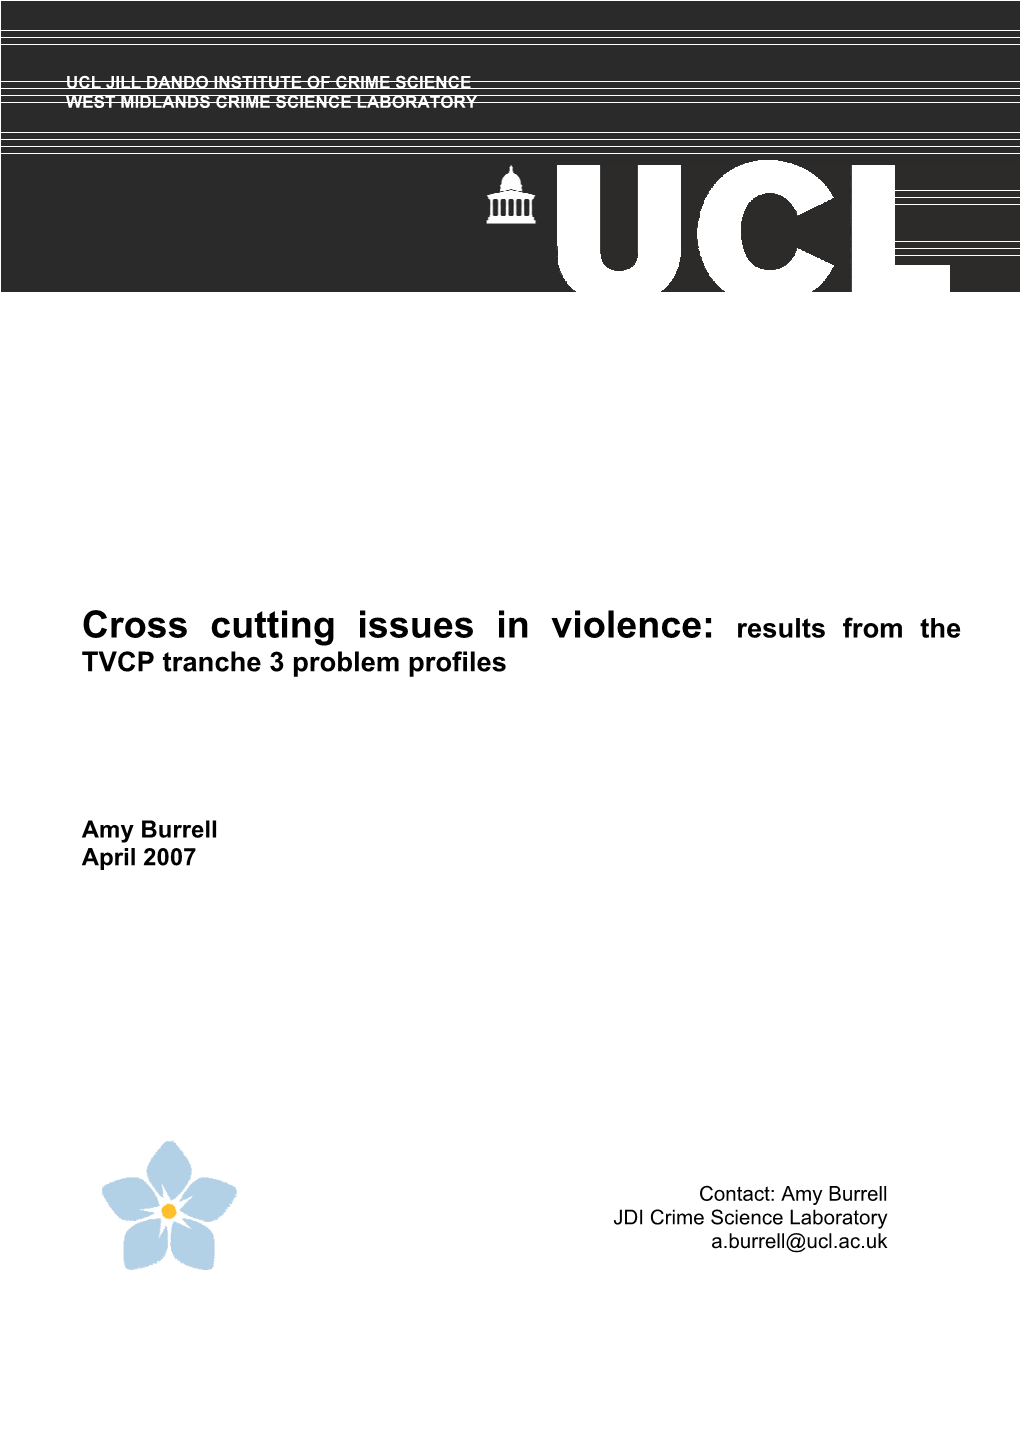 Cross Cutting Issues in Violence: Results from the TVCP Tranche 3 Problem Profiles